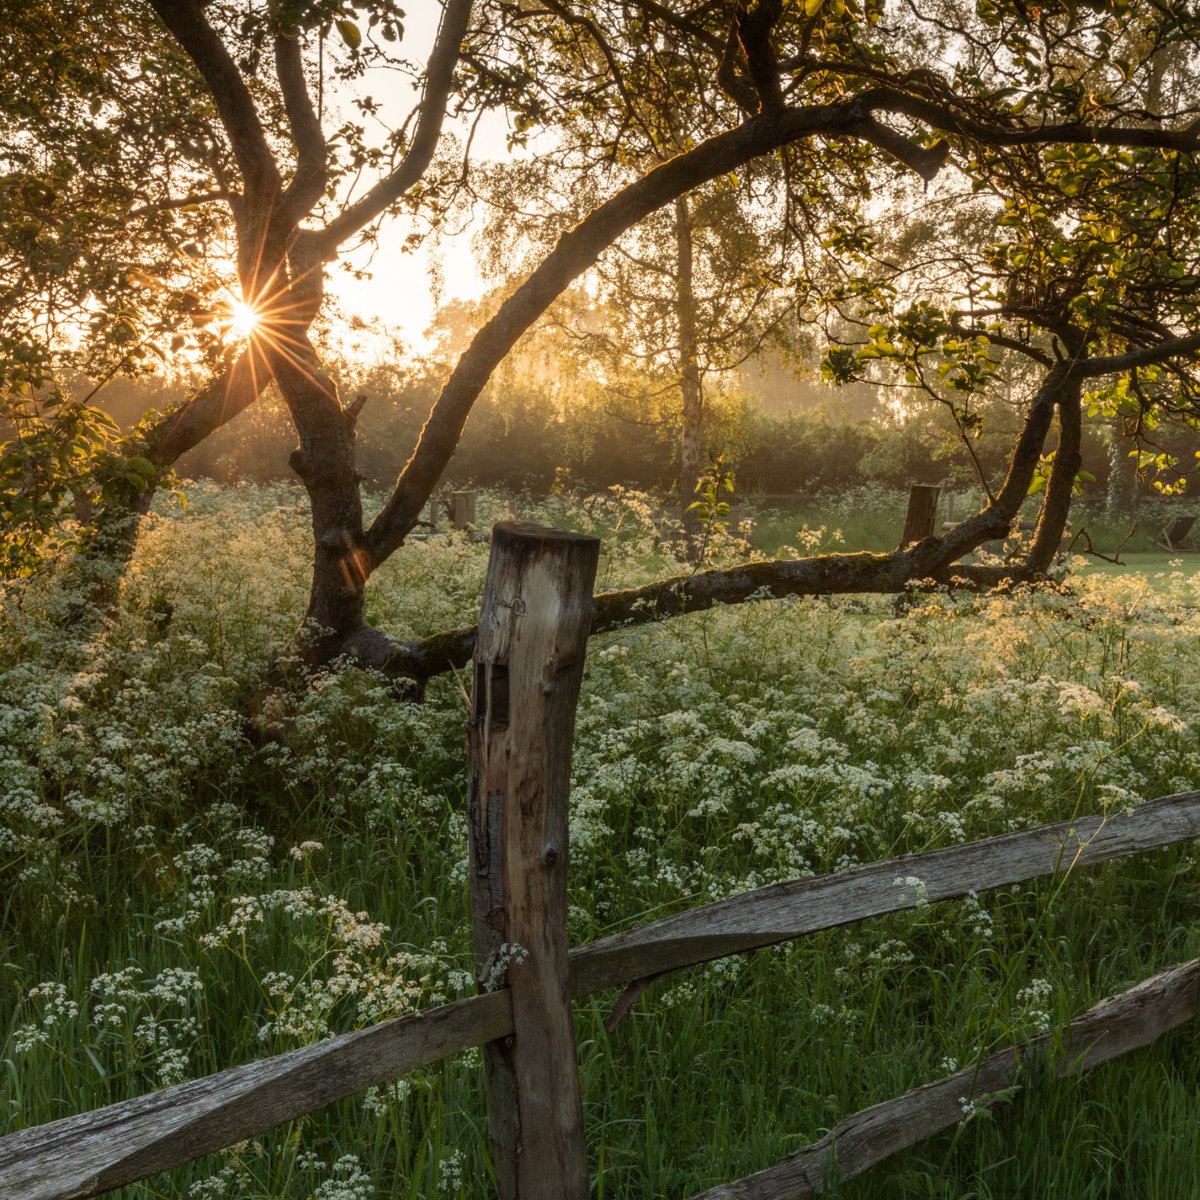 Golden hour when all is quiet and still. Photo: Justin Minns at Anglesey Abbey, Cambridgeshire #NationalTrust